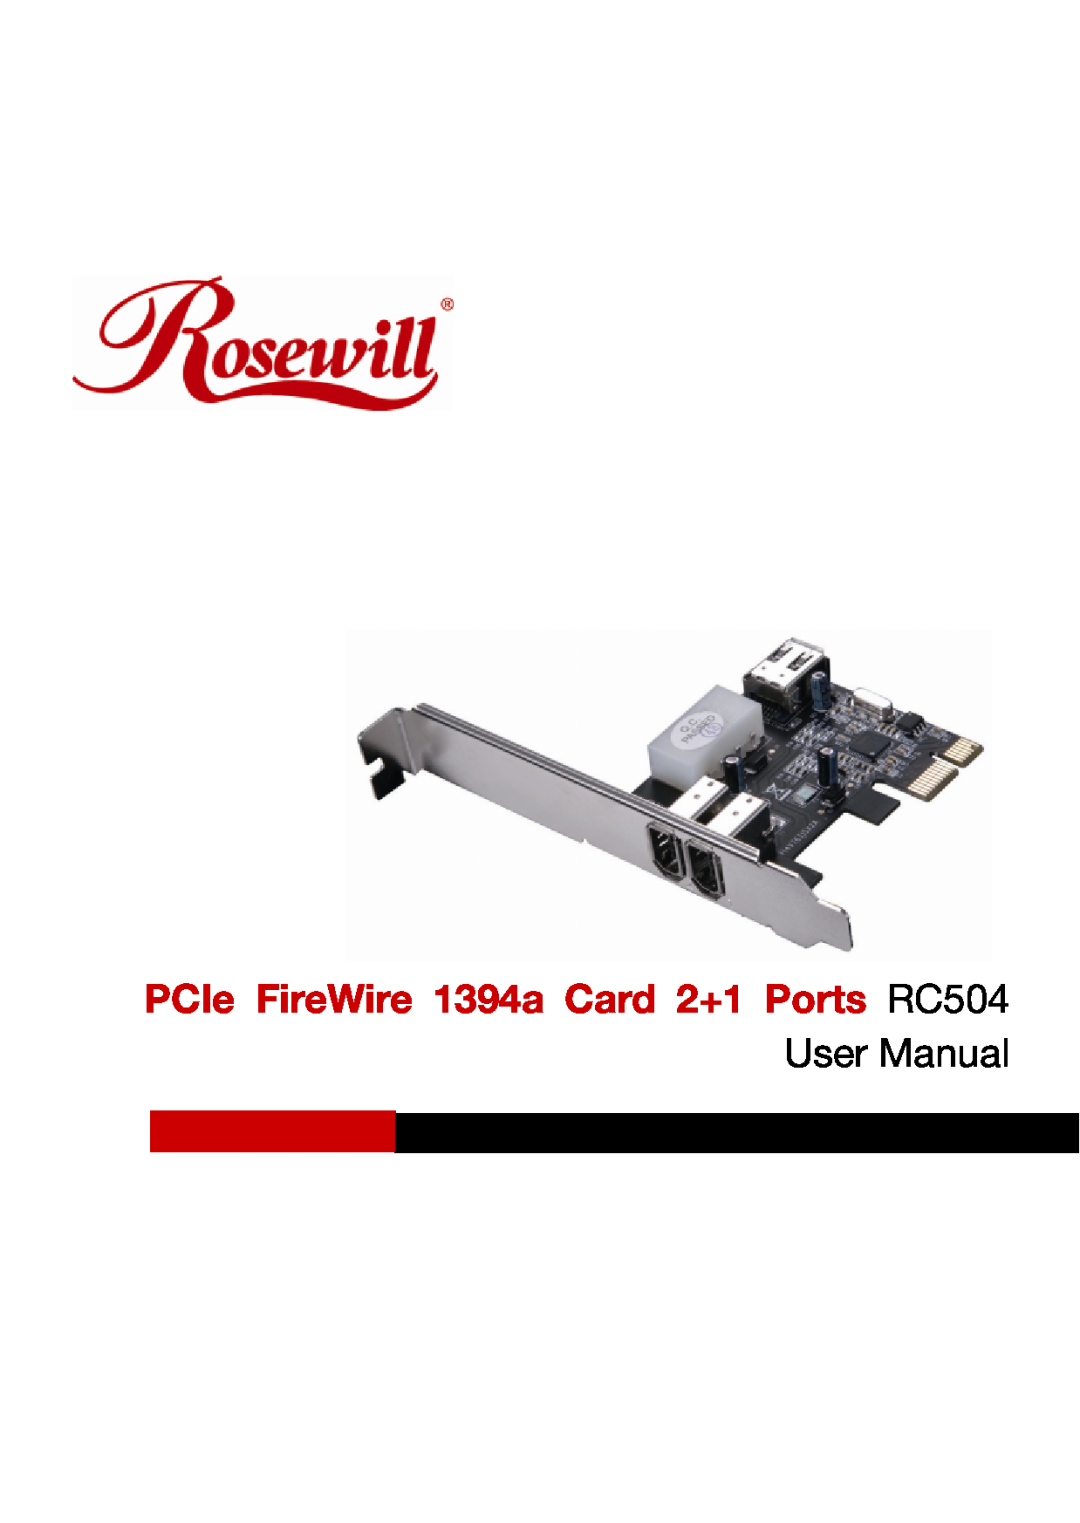 Rosewill user manual PCIe FireWire 1394a Card 2+1 Ports RC504, User Manual 